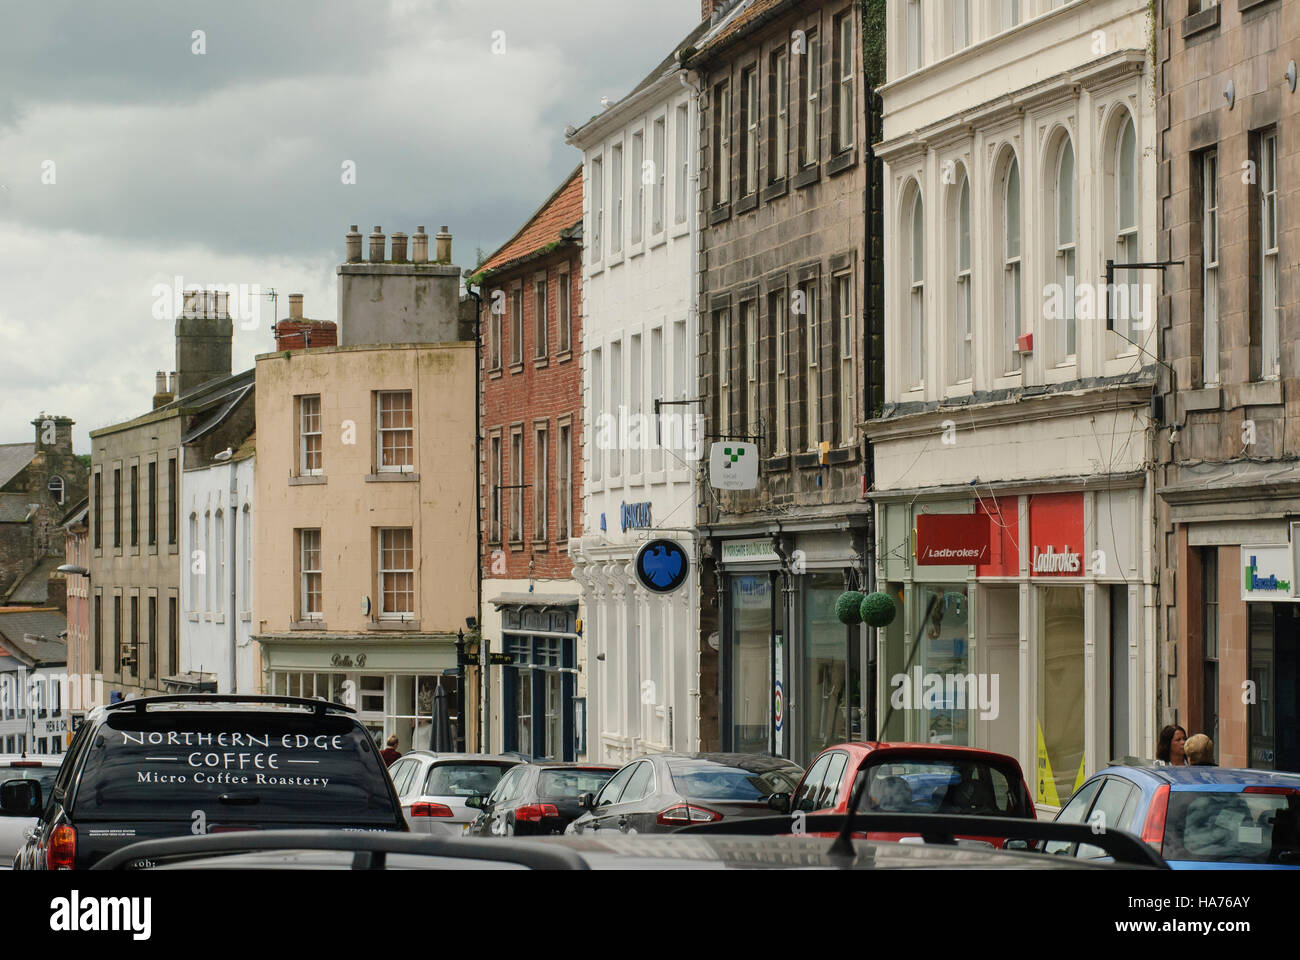 Building facades of an old-fashioned high street in Berwick-upon-Tweed, Northumberland, England Stock Photo